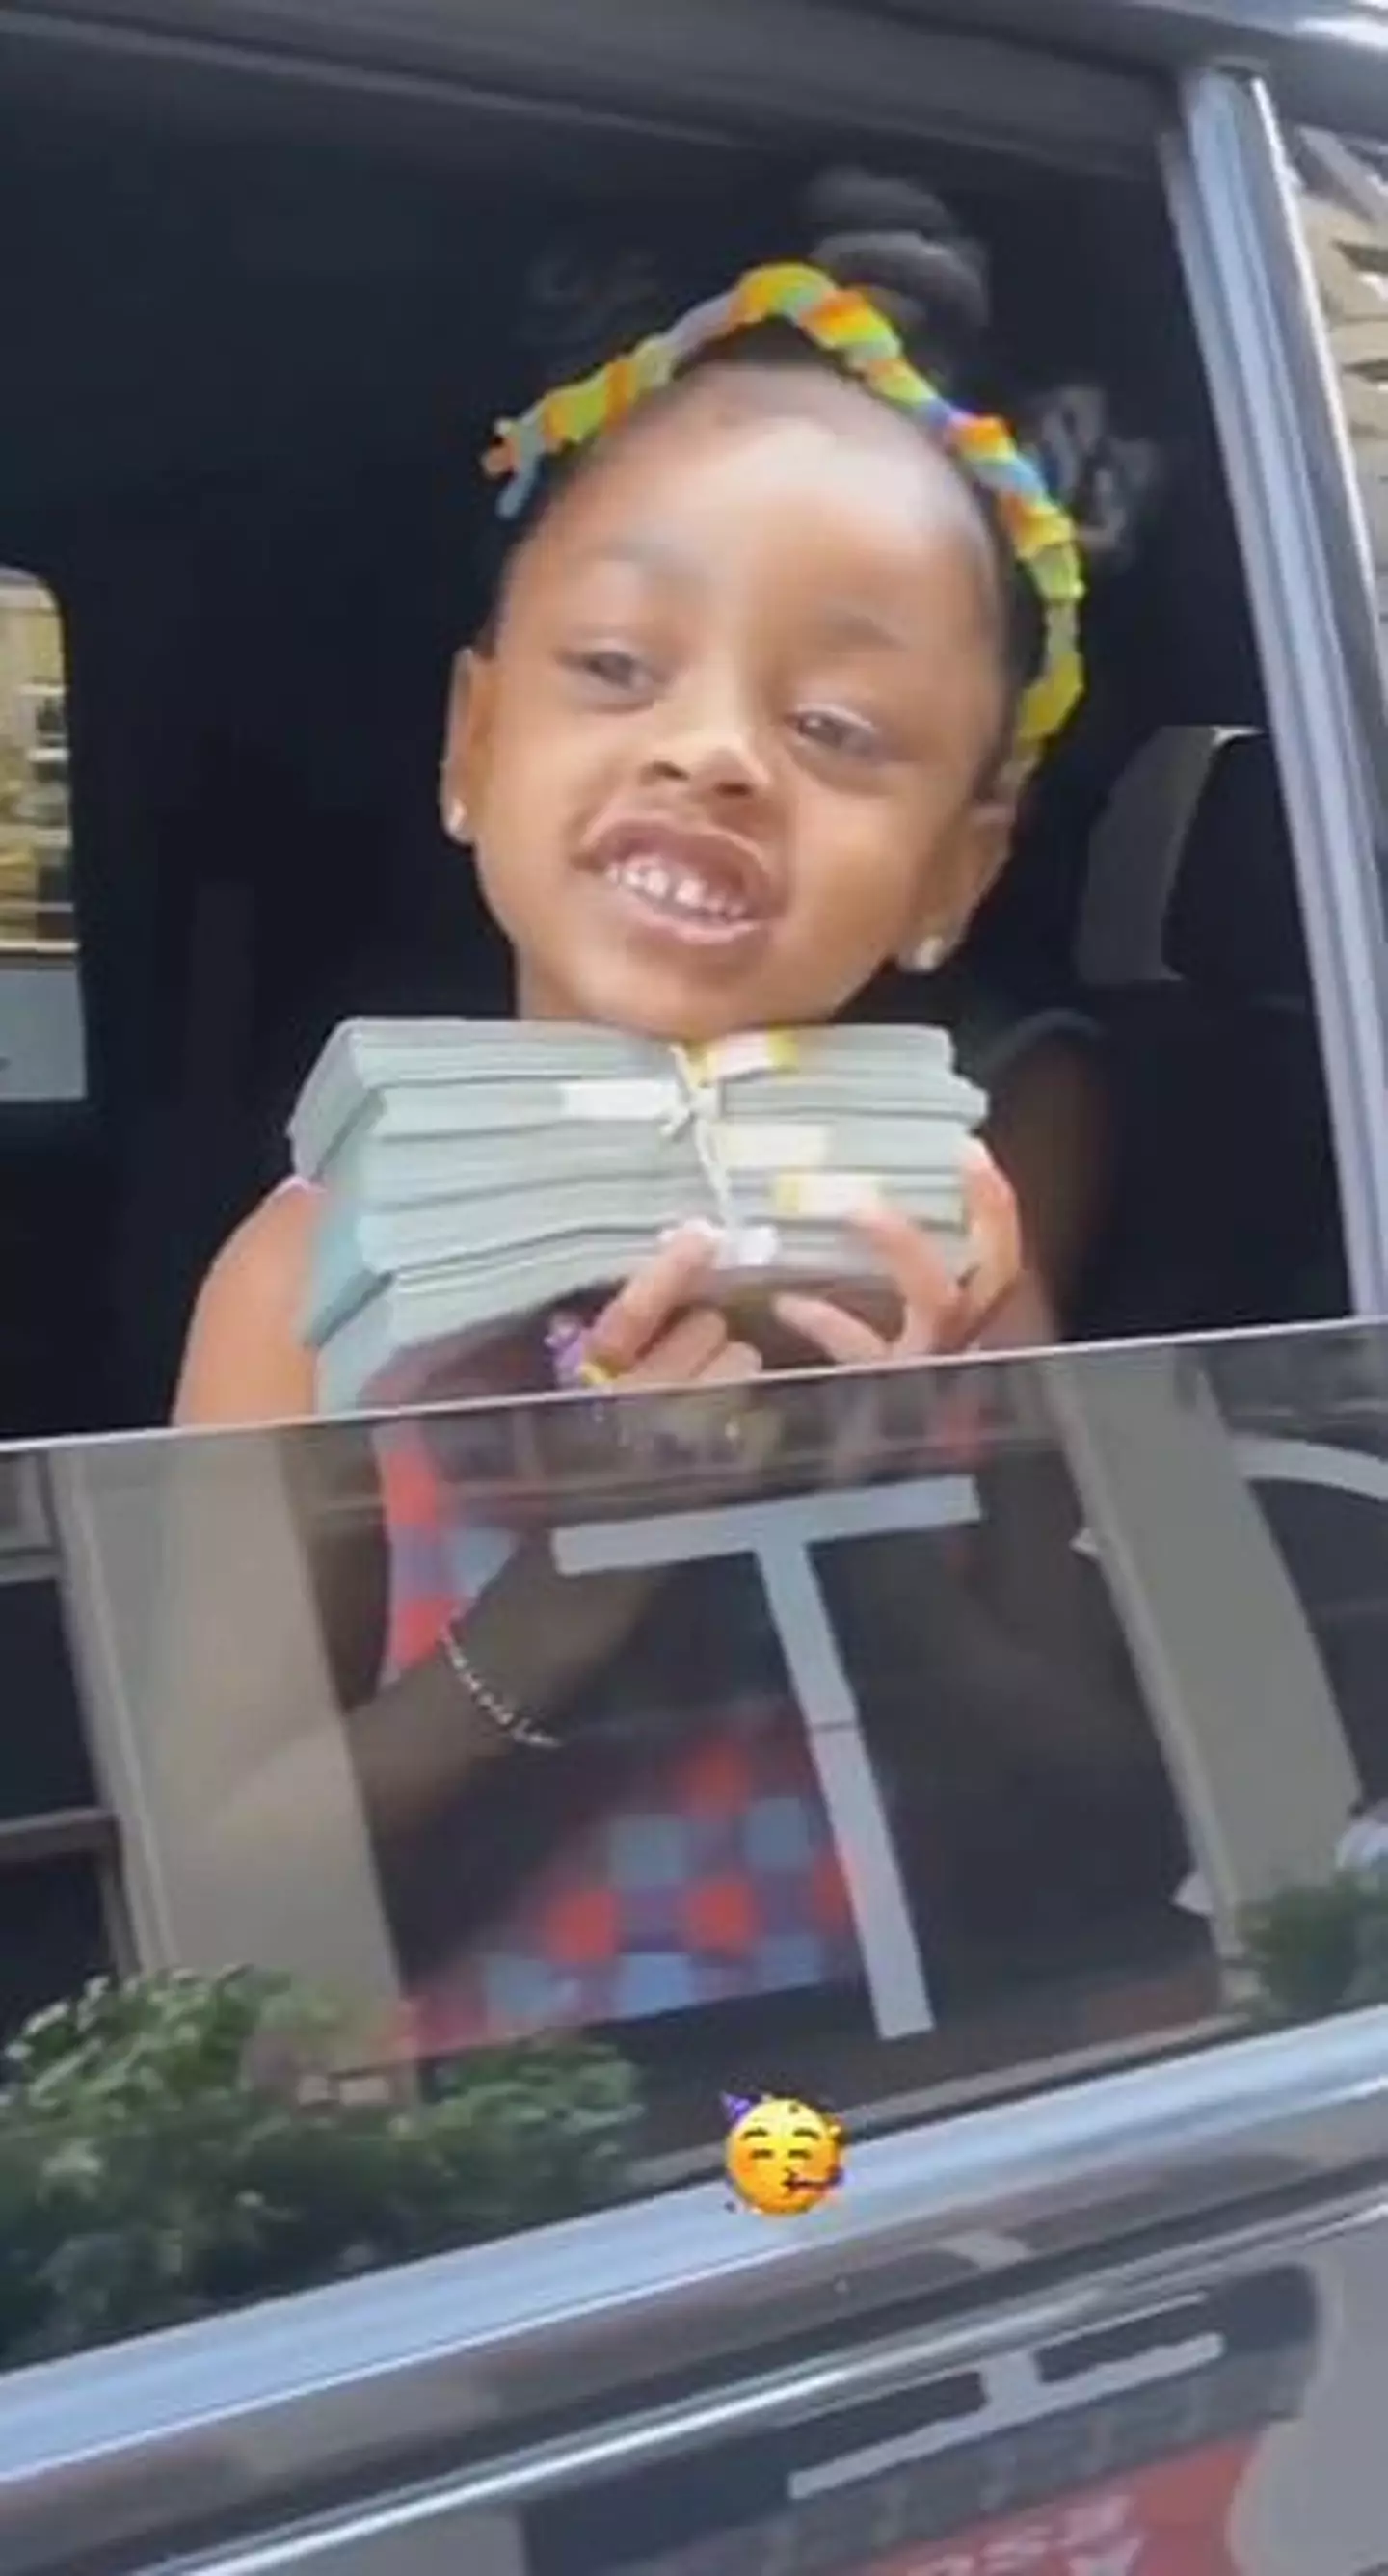 Cardi B and Offset gifted their four-year-old daughter a whopping $50,000 (£41,962) in cash for her Birthday.